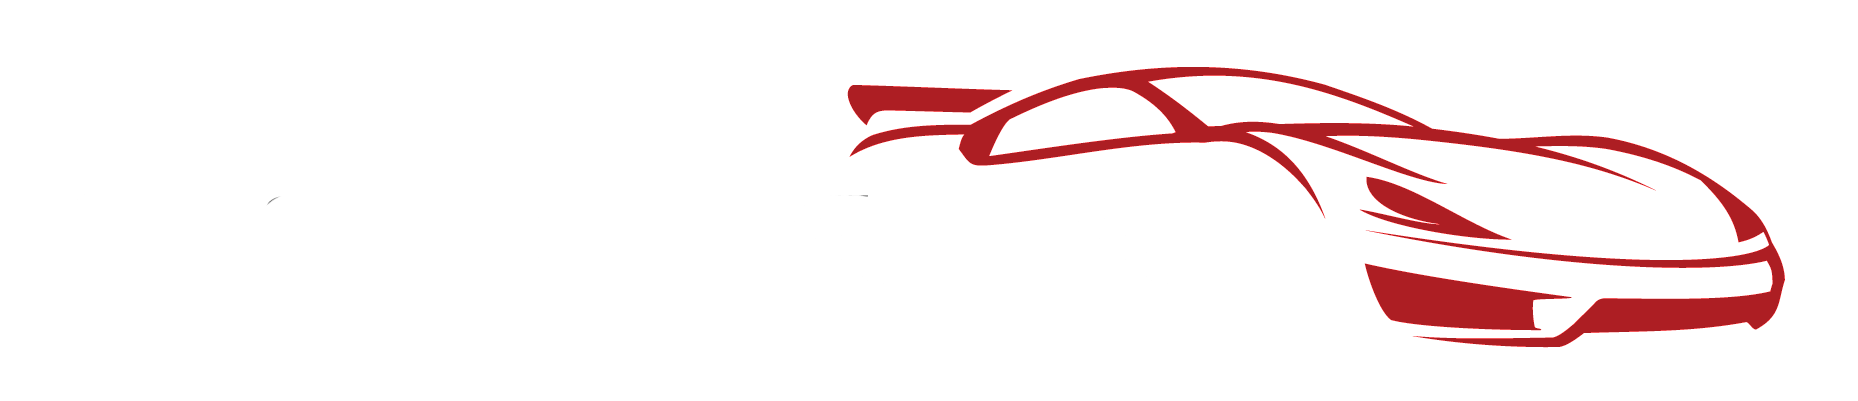 Auto Tinting Logo - Spectra Photosync Arrives in Hawaii – Auto Tinting Hawaii By Shea's ...